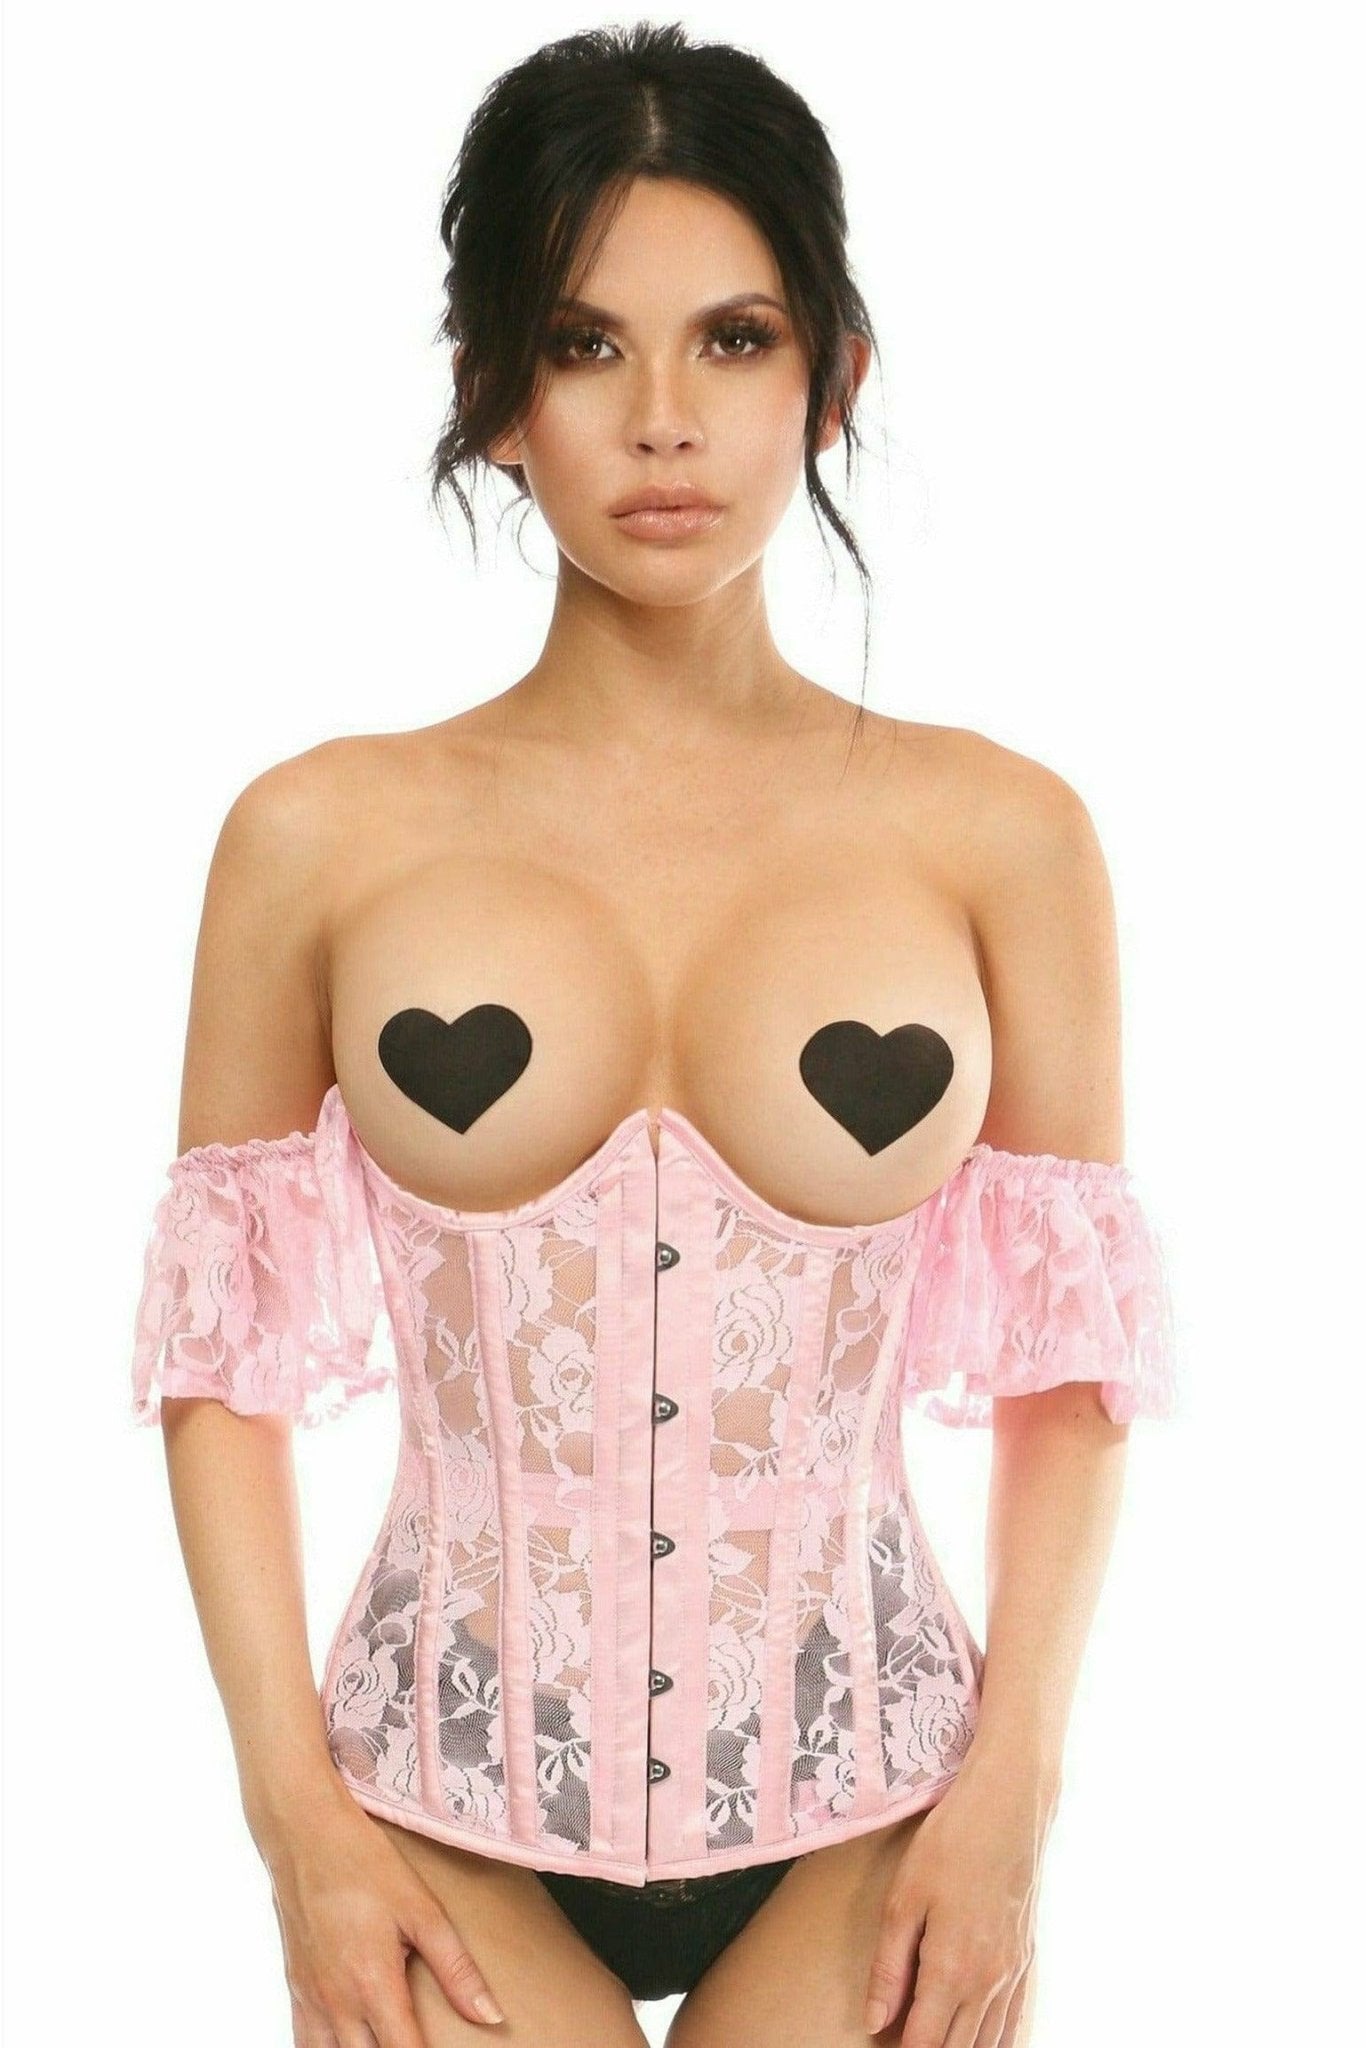 Sexy Sheer Light Pink Lace Underbust Underwire Corset with Ruffle Sleeve Musotica.com